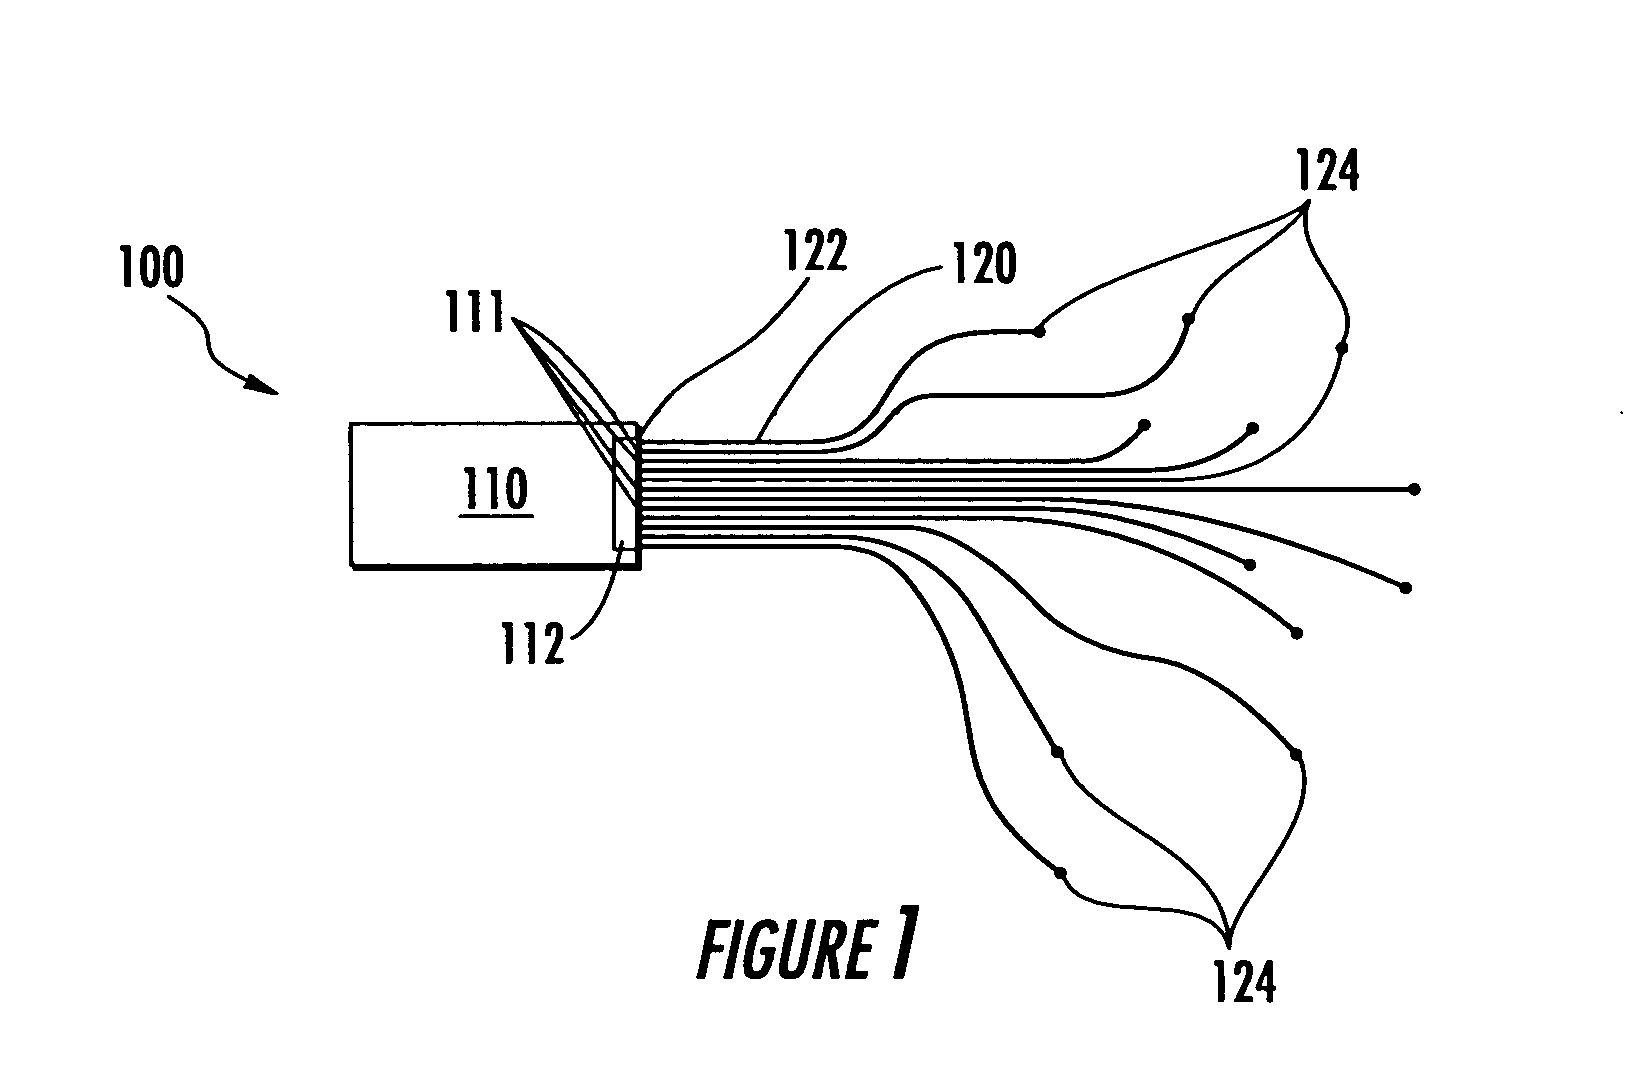 Apparatus and methods for using fiber optic arrays in optical communication systems